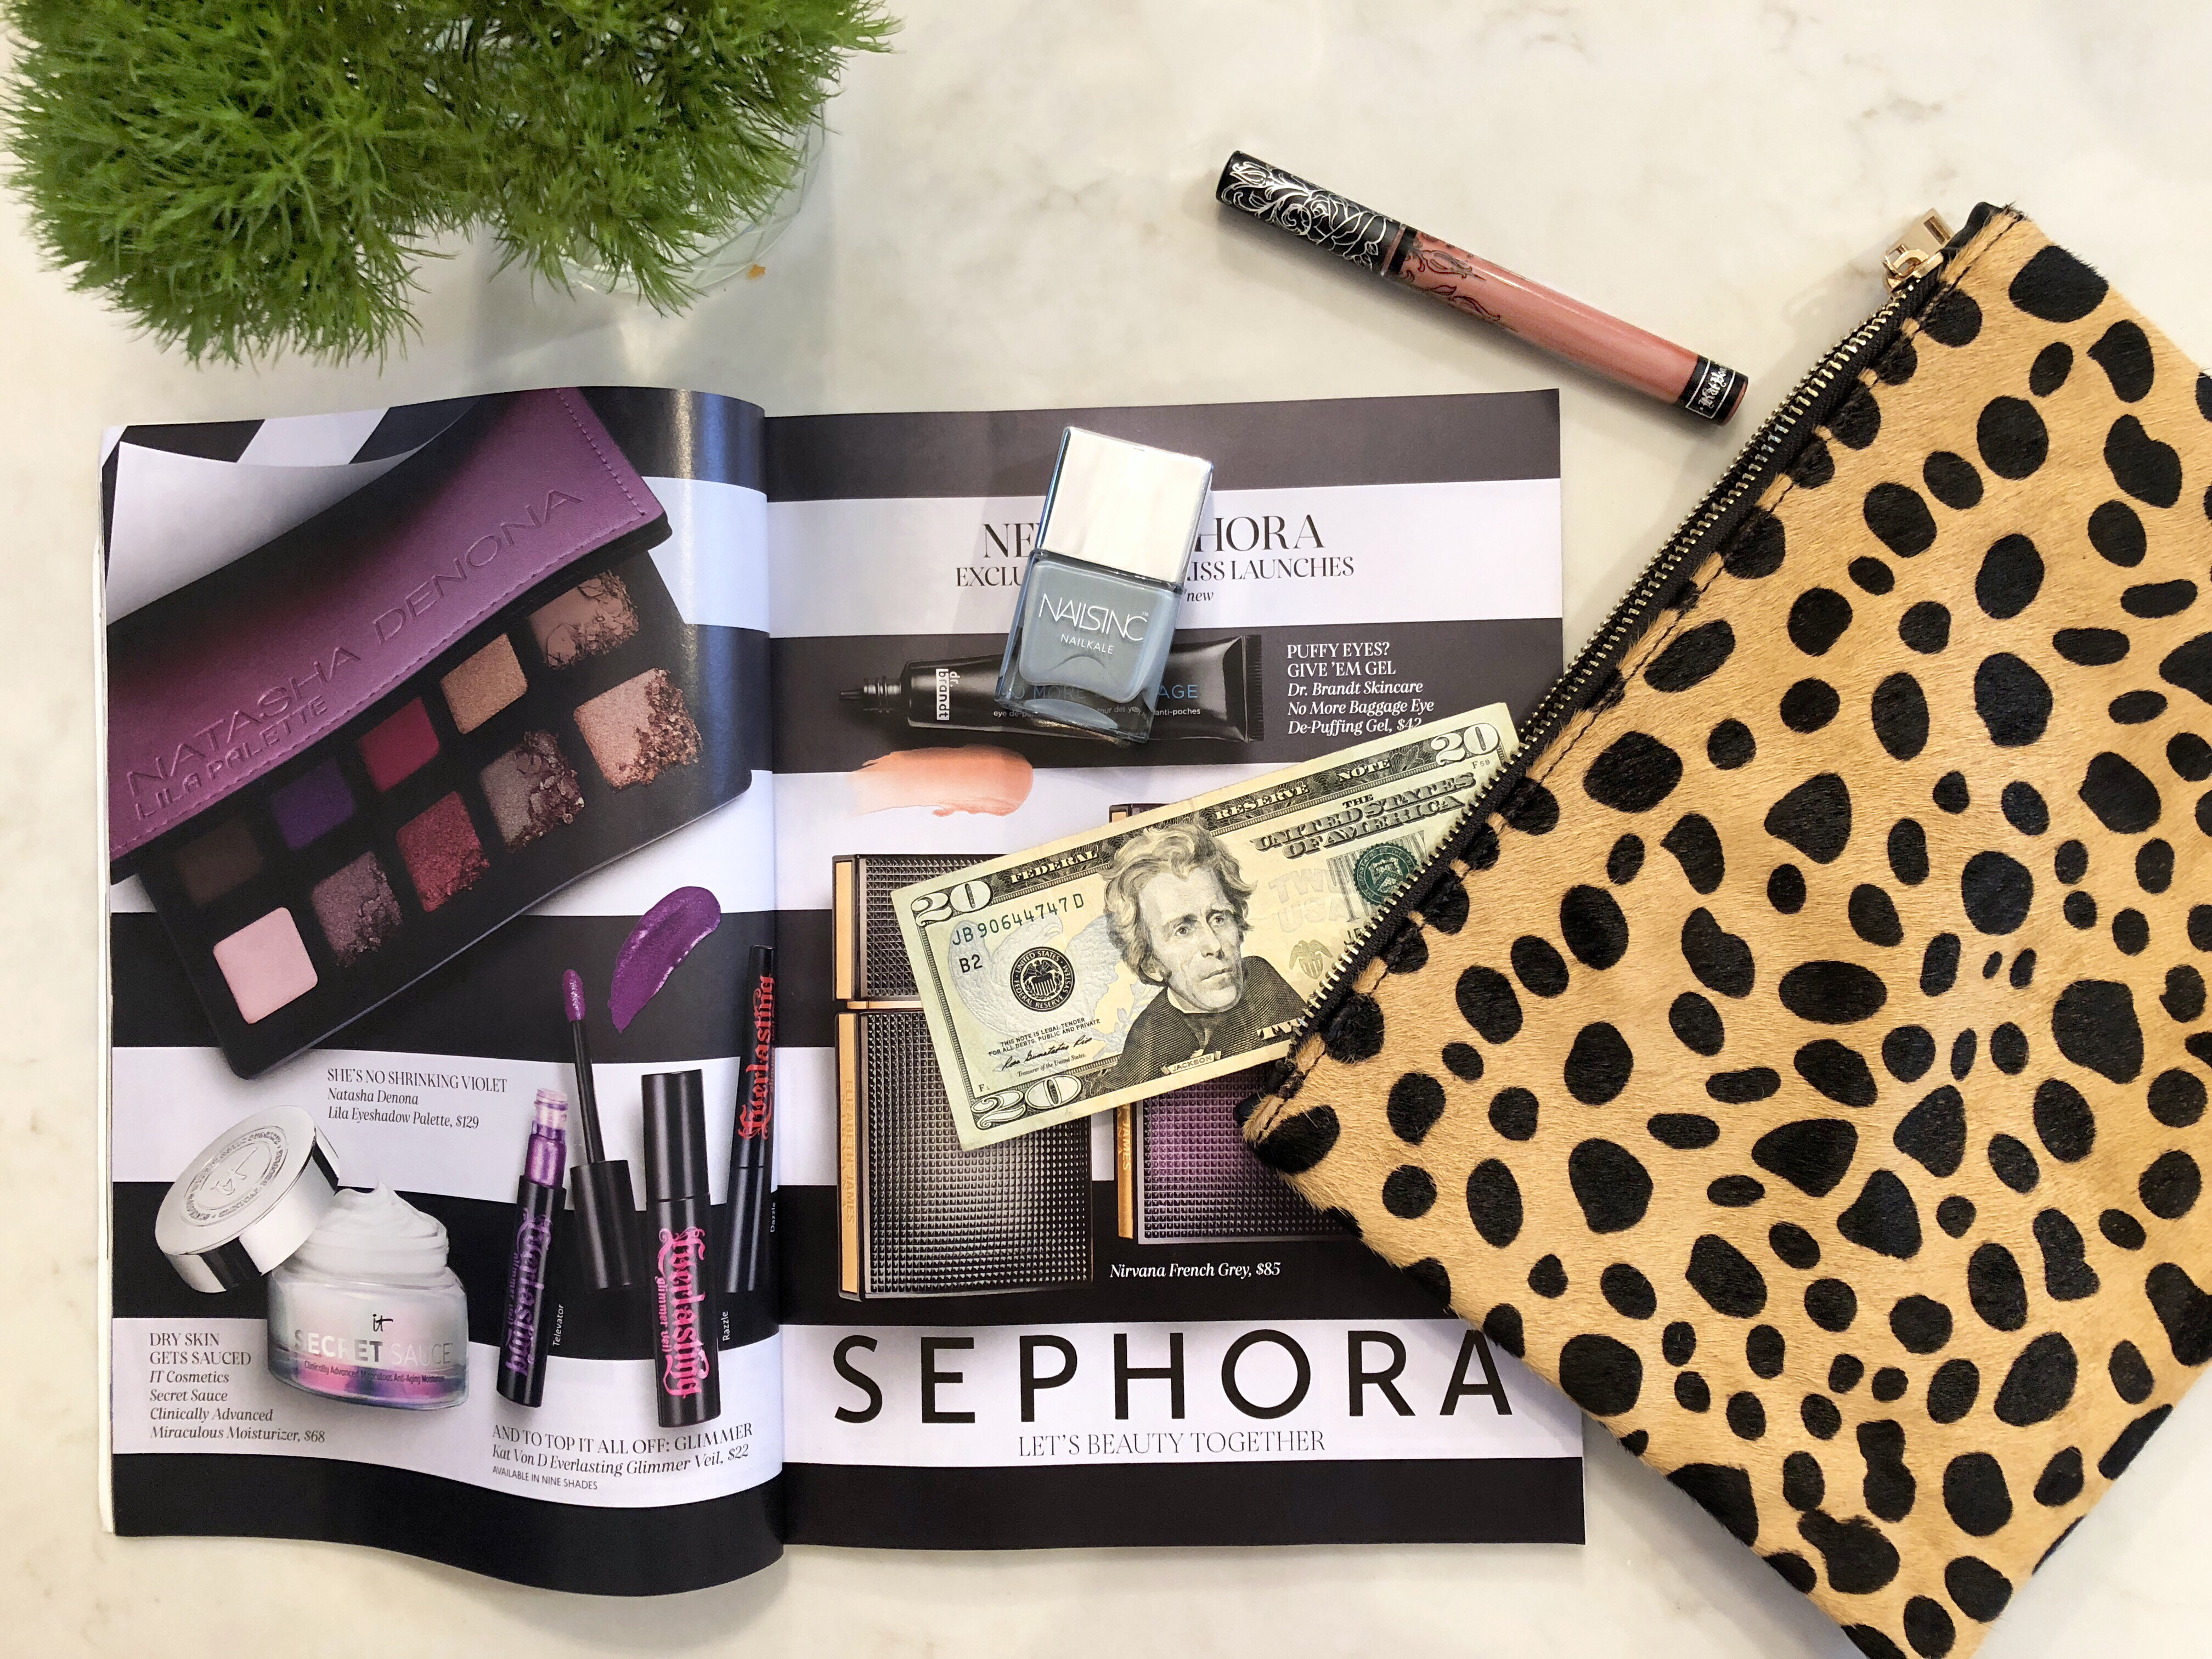 The 10 Best Beauty Buys From Sephora For Under 20 Bucks